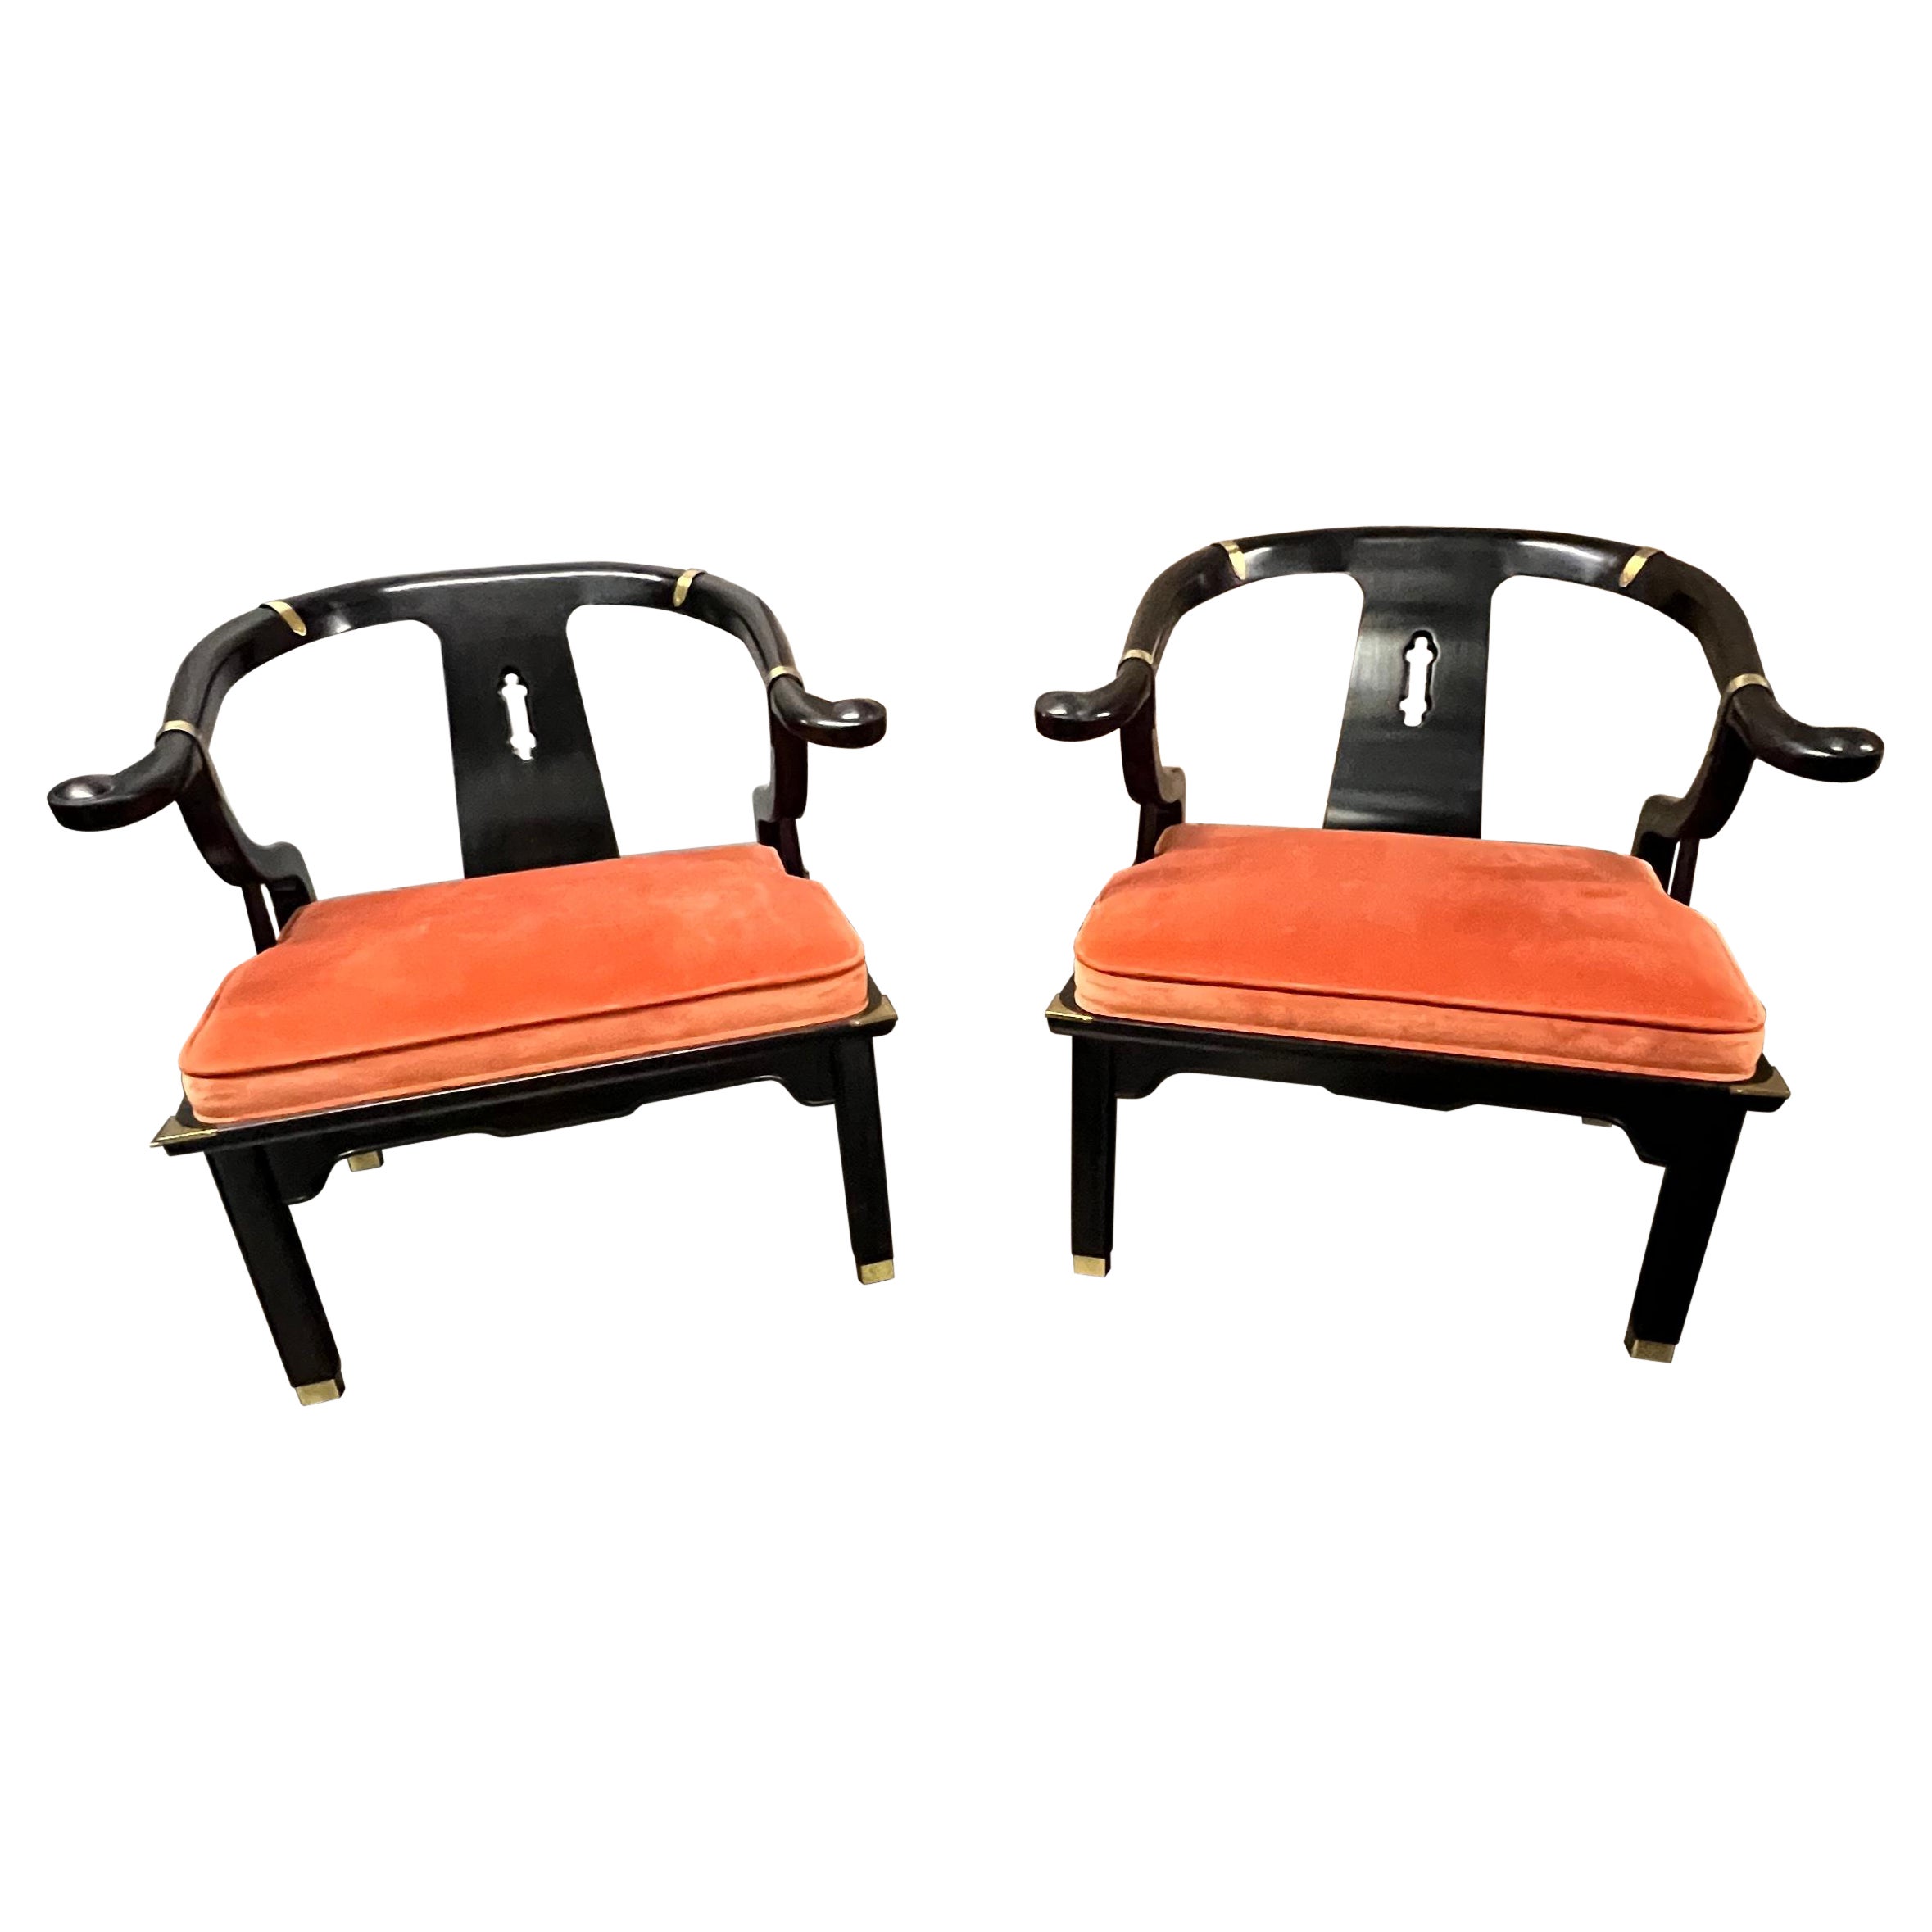 Pair of James Mont Style Mid-Century Lacquered Horseshoe Chairs by Century For Sale